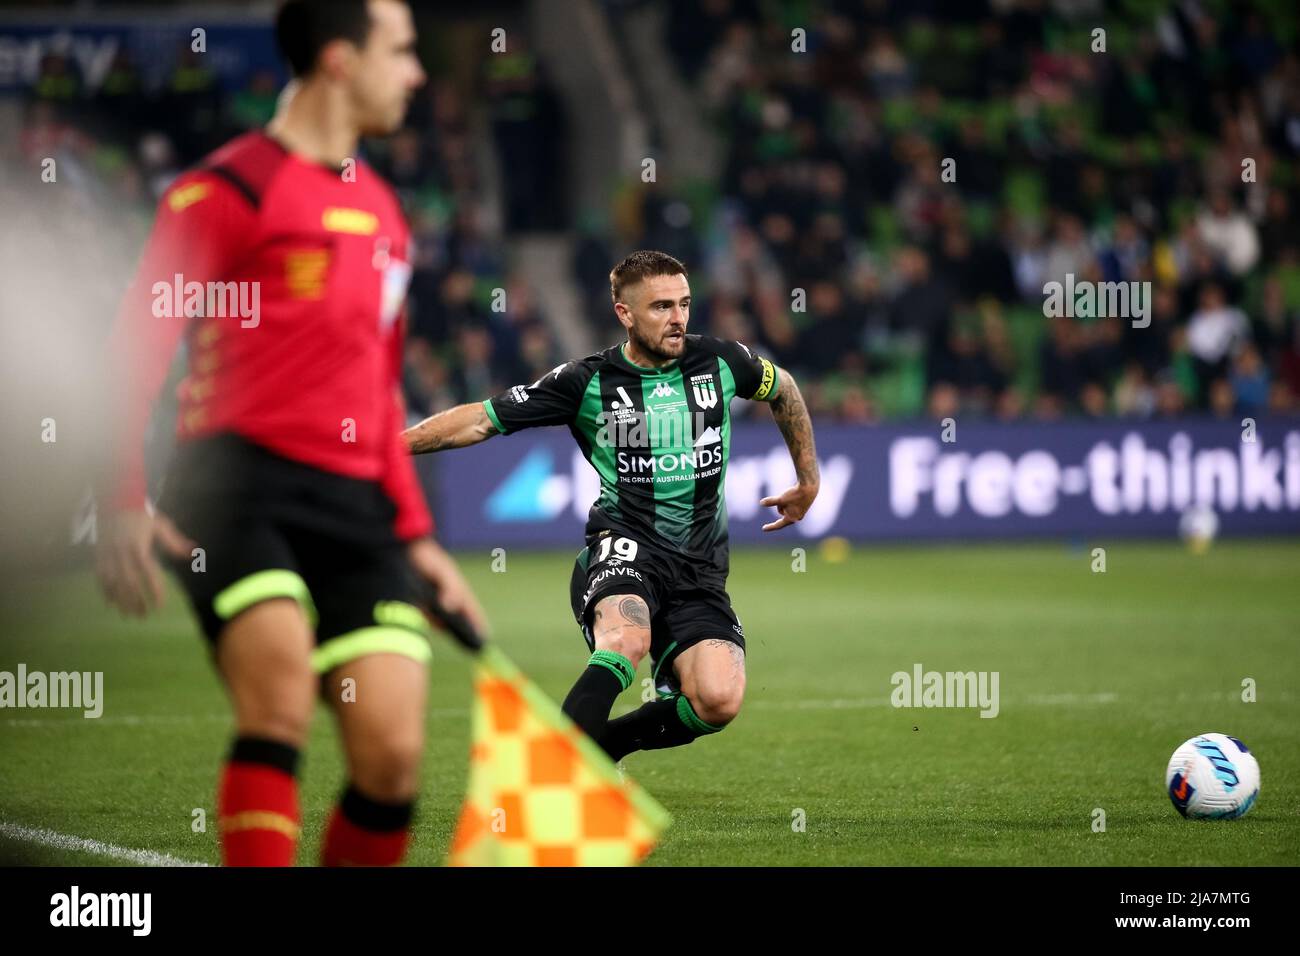 Melbourne, Australia, 28 May, 2022. Joshua Risdon of Western United controls the ball during the A-League Grand Final soccer match between Melbourne City FC and Western United at AAMI Park on May 28, 2022 in Melbourne, Australia. Credit: Dave Hewison/Speed Media/Alamy Live News Stock Photo